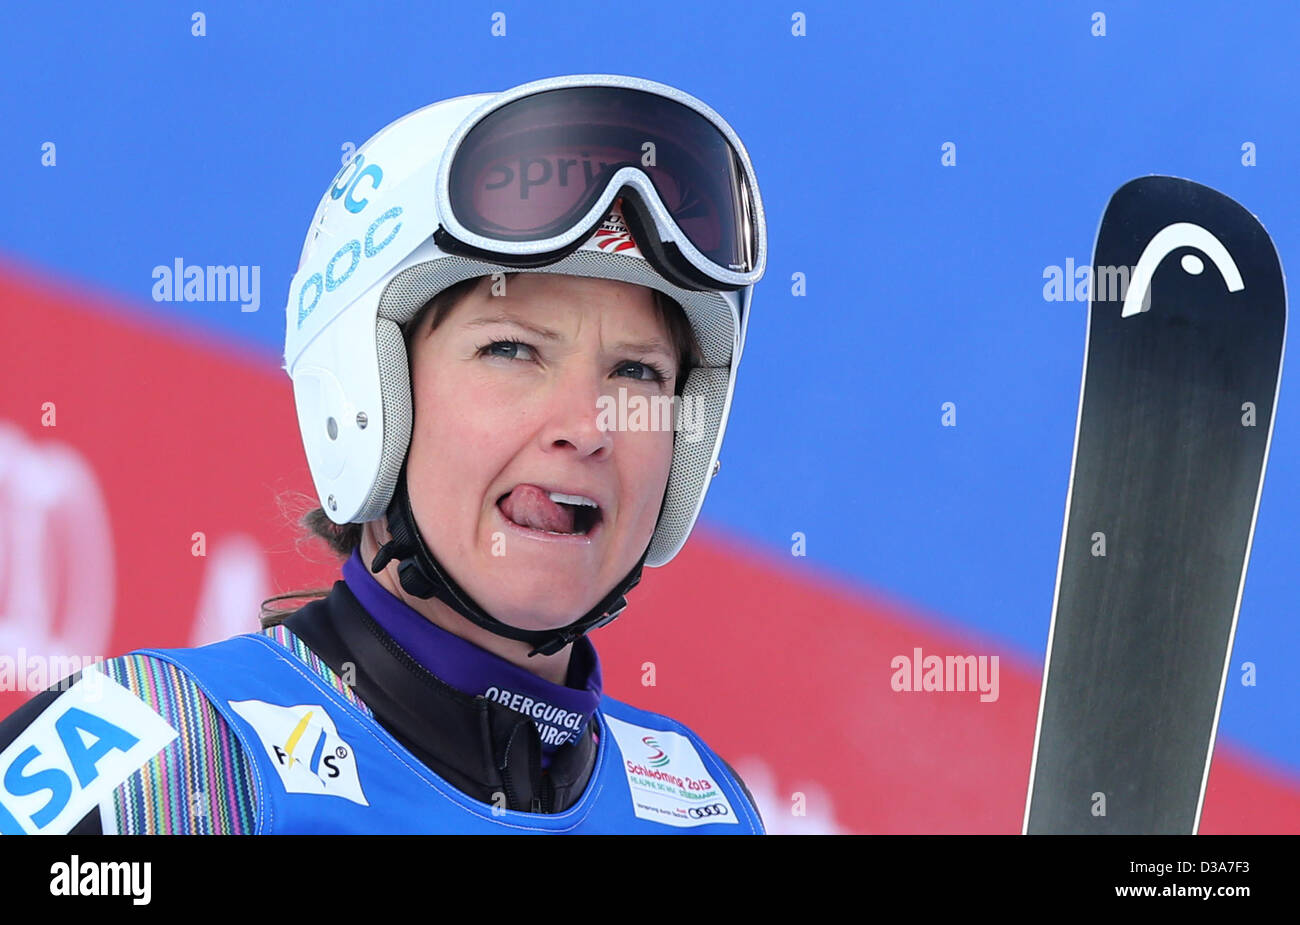 Julia Mancuso of US reacts during the first run of the women's giant slalom at the Alpine Skiing World Championships in Schladming, Austria, 14 February 2013. Photo: Karl-Josef Hildenbrand/dpa +++(c) dpa - Bildfunk+++ Stock Photo